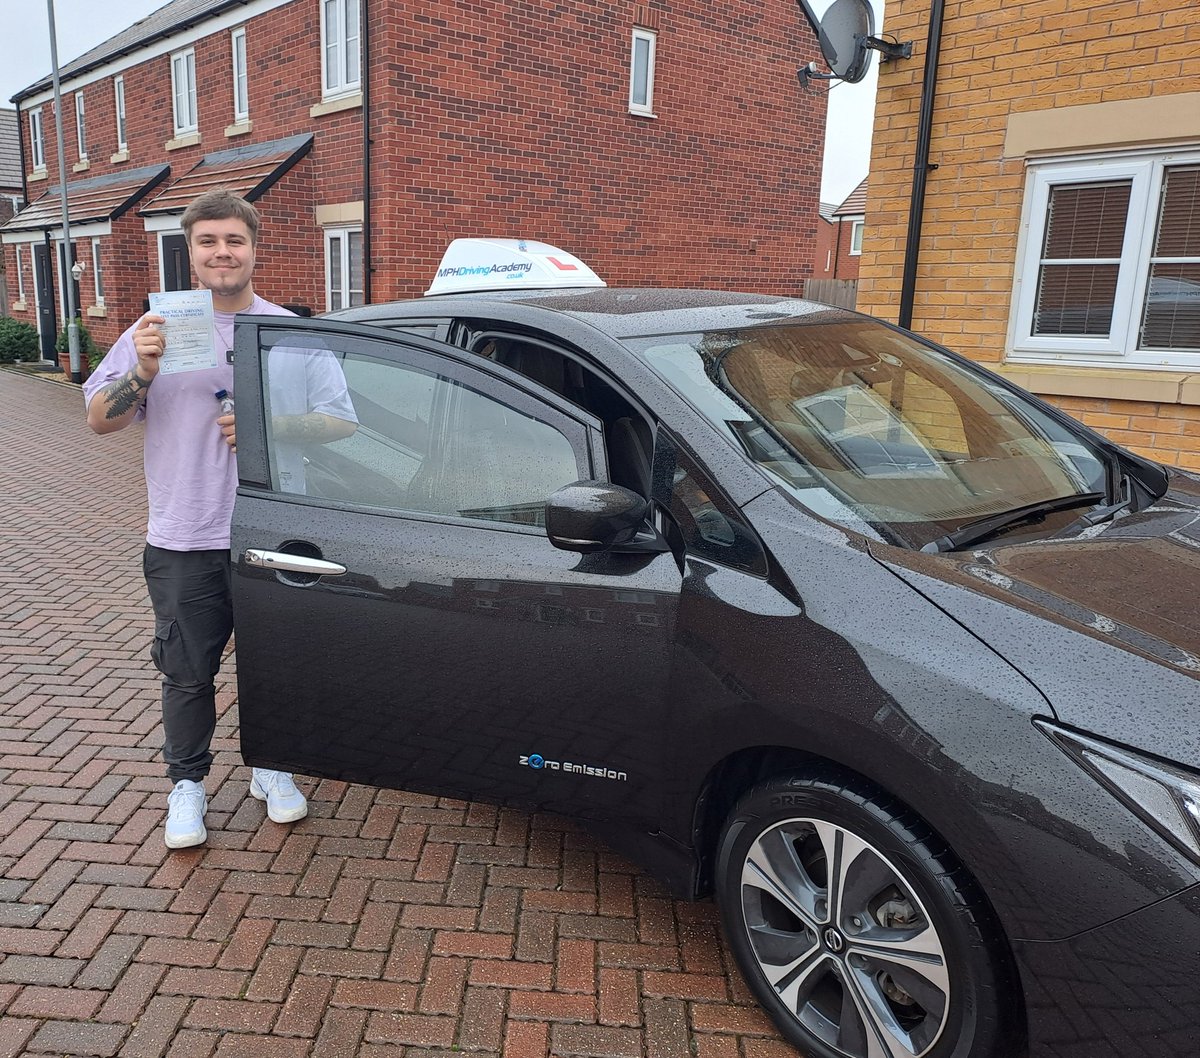 Congratulations to Joshua Aldiss - a 'flipping' great pass today👏🚗.
Time to celebrate with some pancakes 🥞!! #mphdrivingacademy #zeroemissions #nissanleaf 
mphdrivingacademy.co.uk